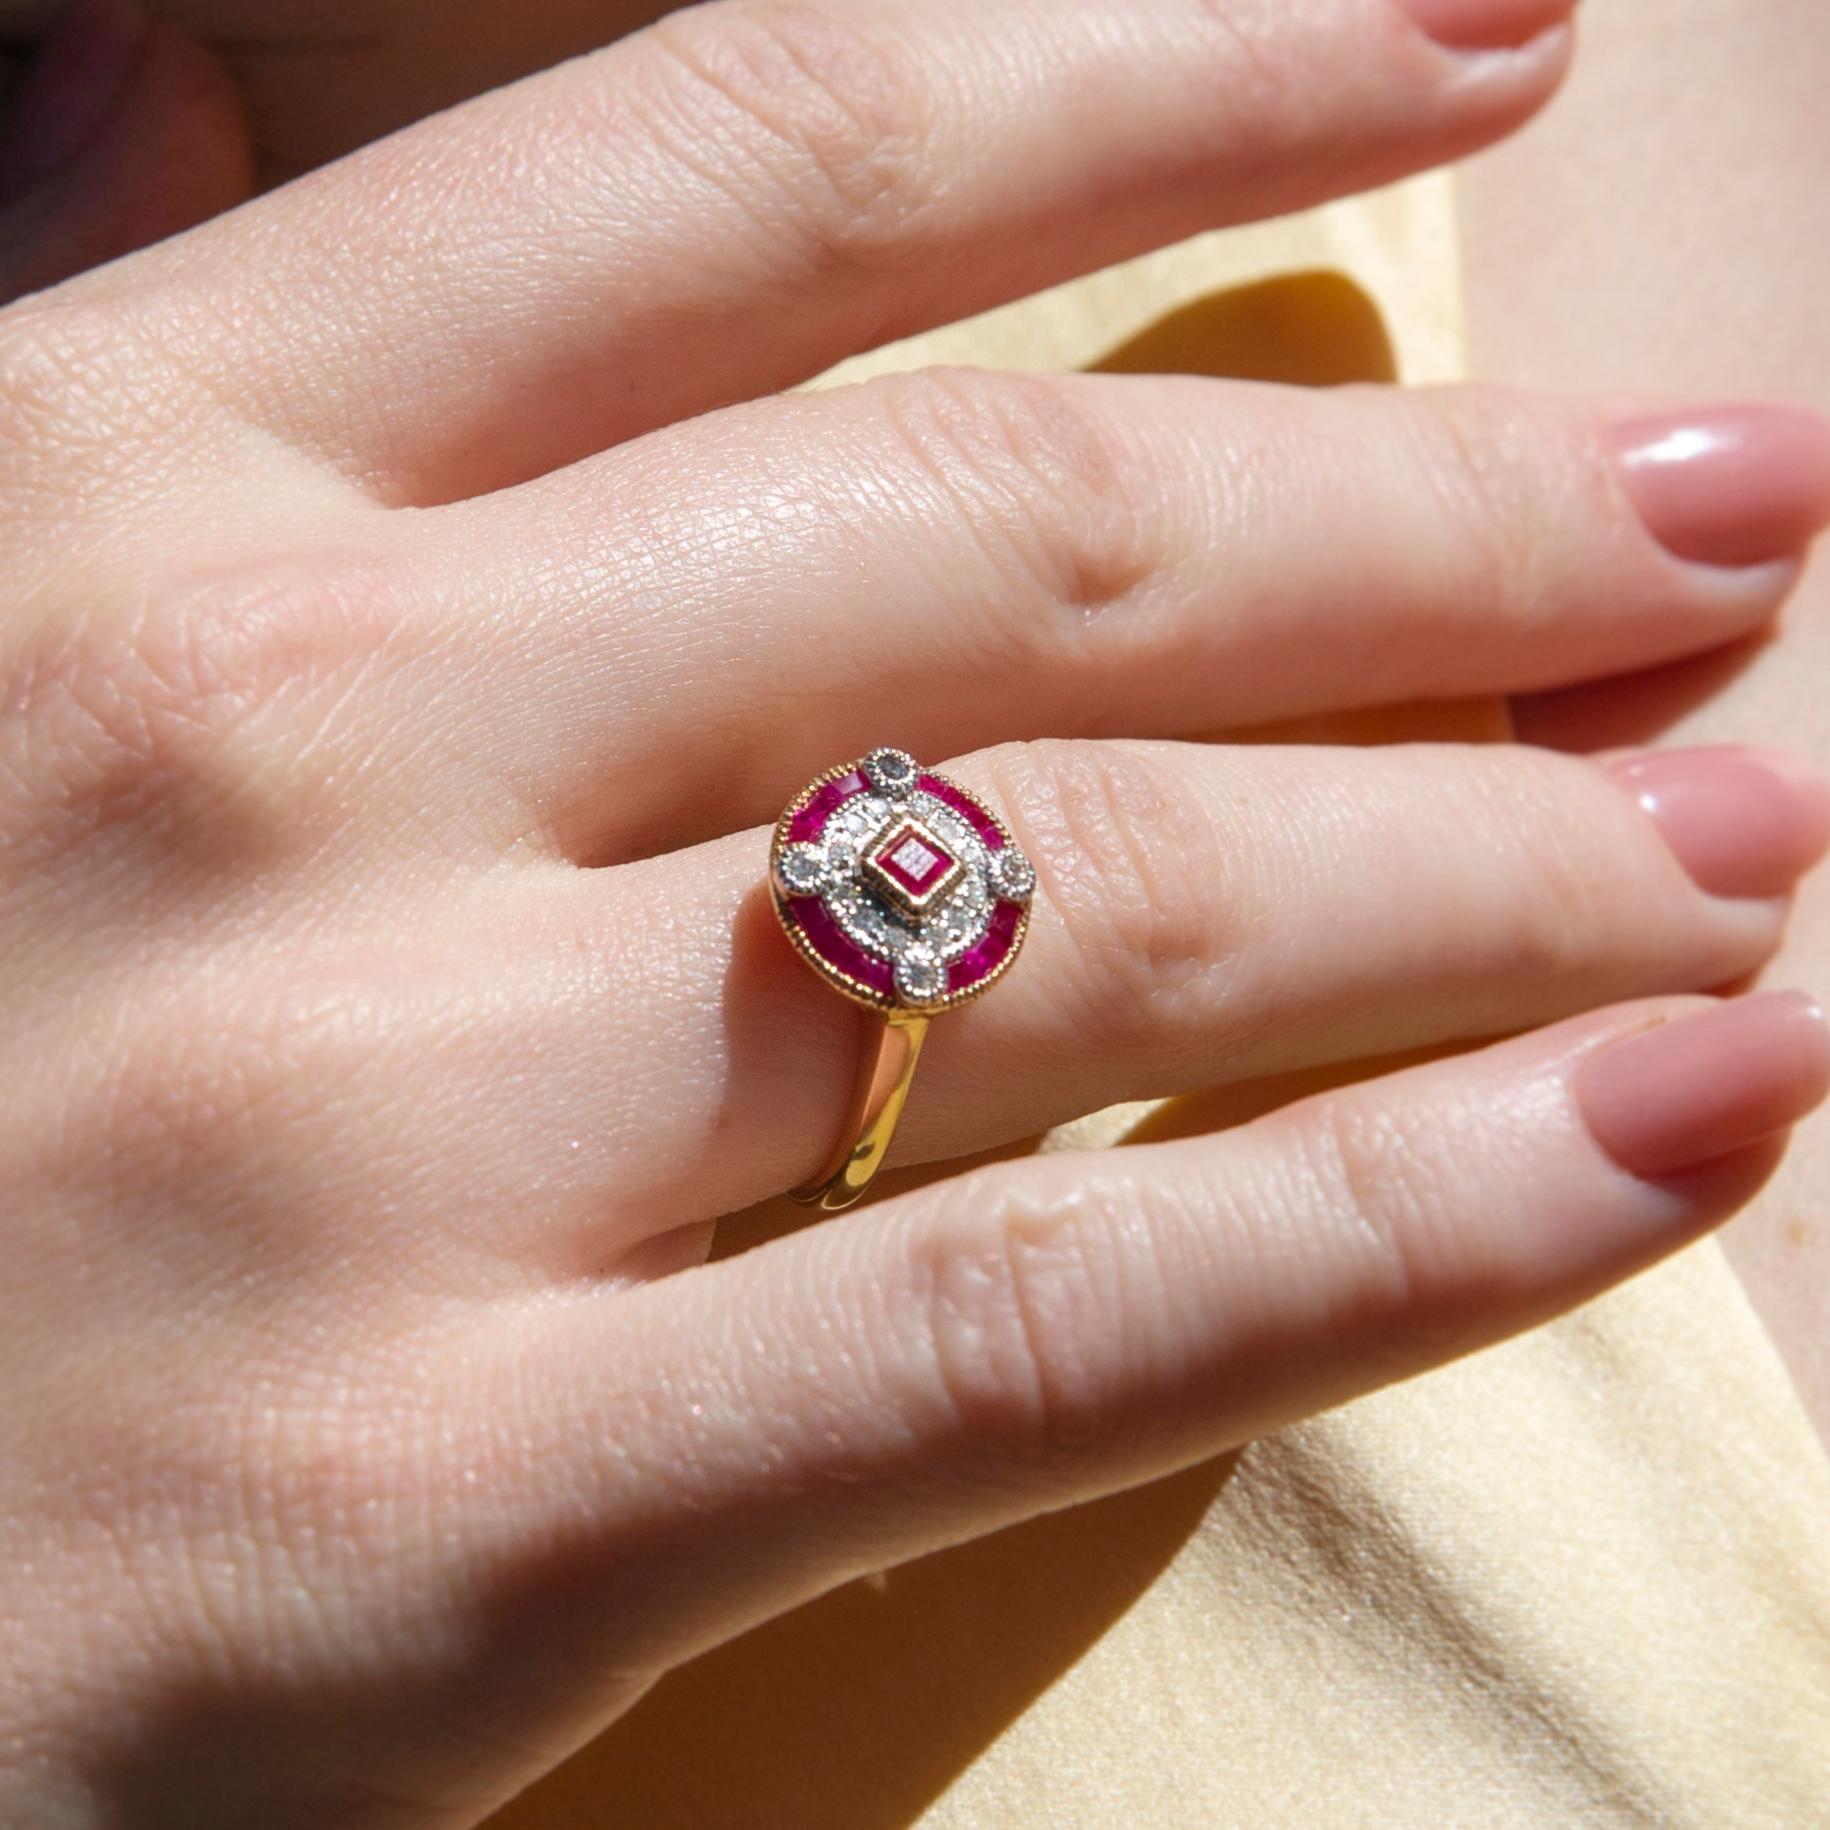 The 9 carat gold Harriet Ring imagines a time and a place where love and passion knew no bounds. Her royal red rubies and sparkling diamonds encapsulate the beauty of a romance that continues to burn ever brighter.

The Harriet Ring Gem Details
The